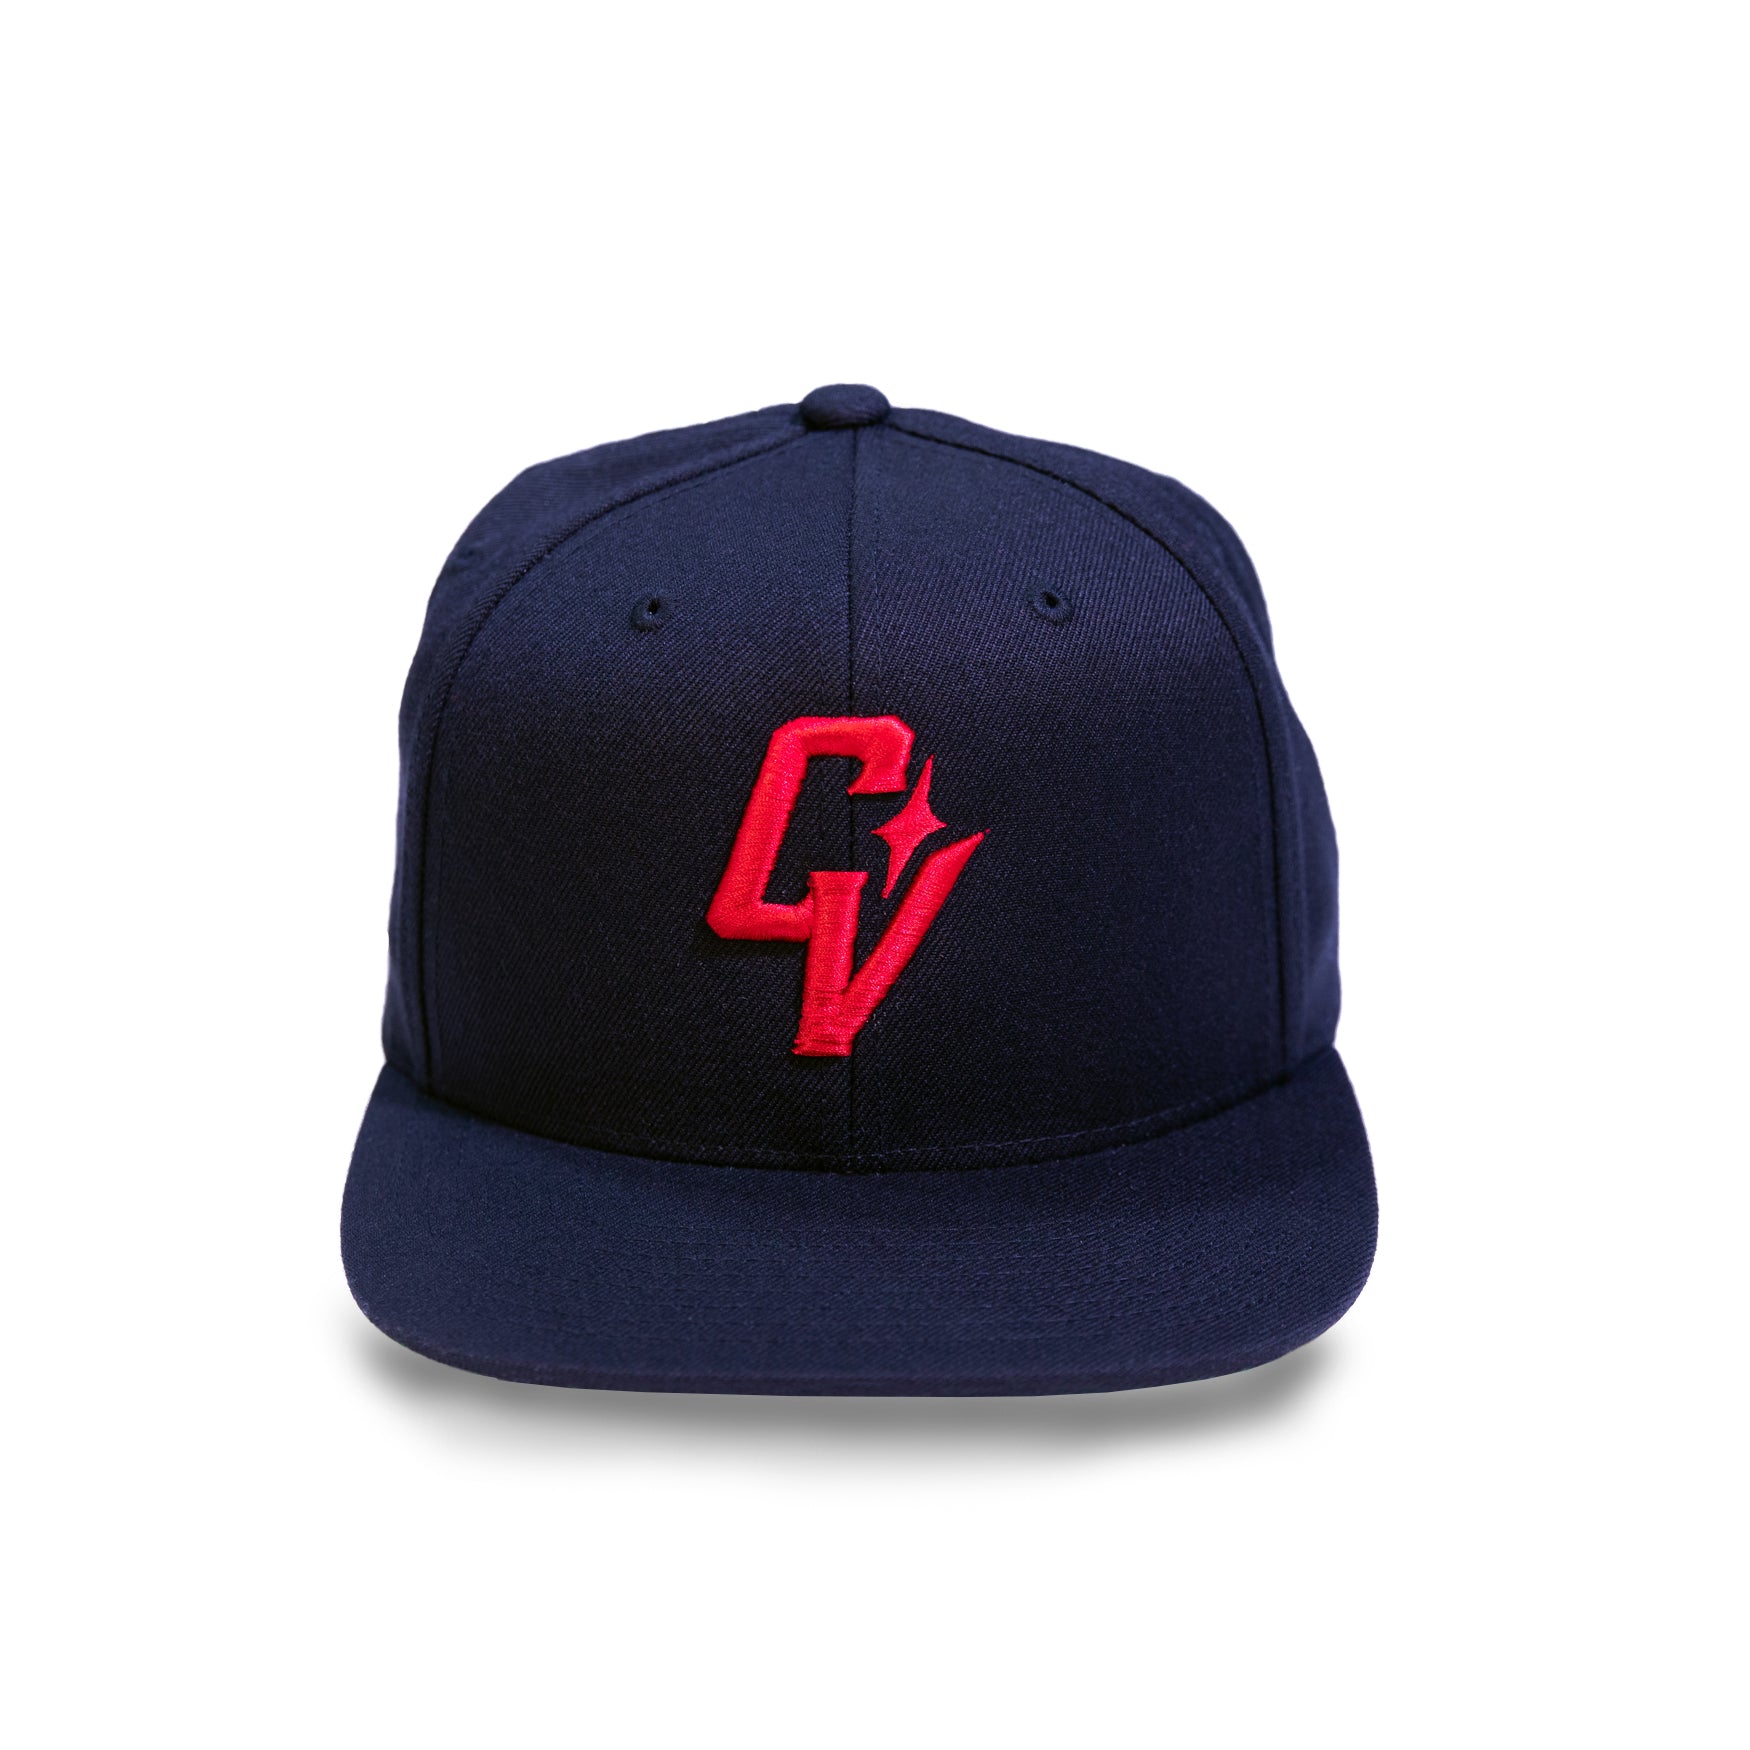 CV LOGO FITTED - BLK/ RED